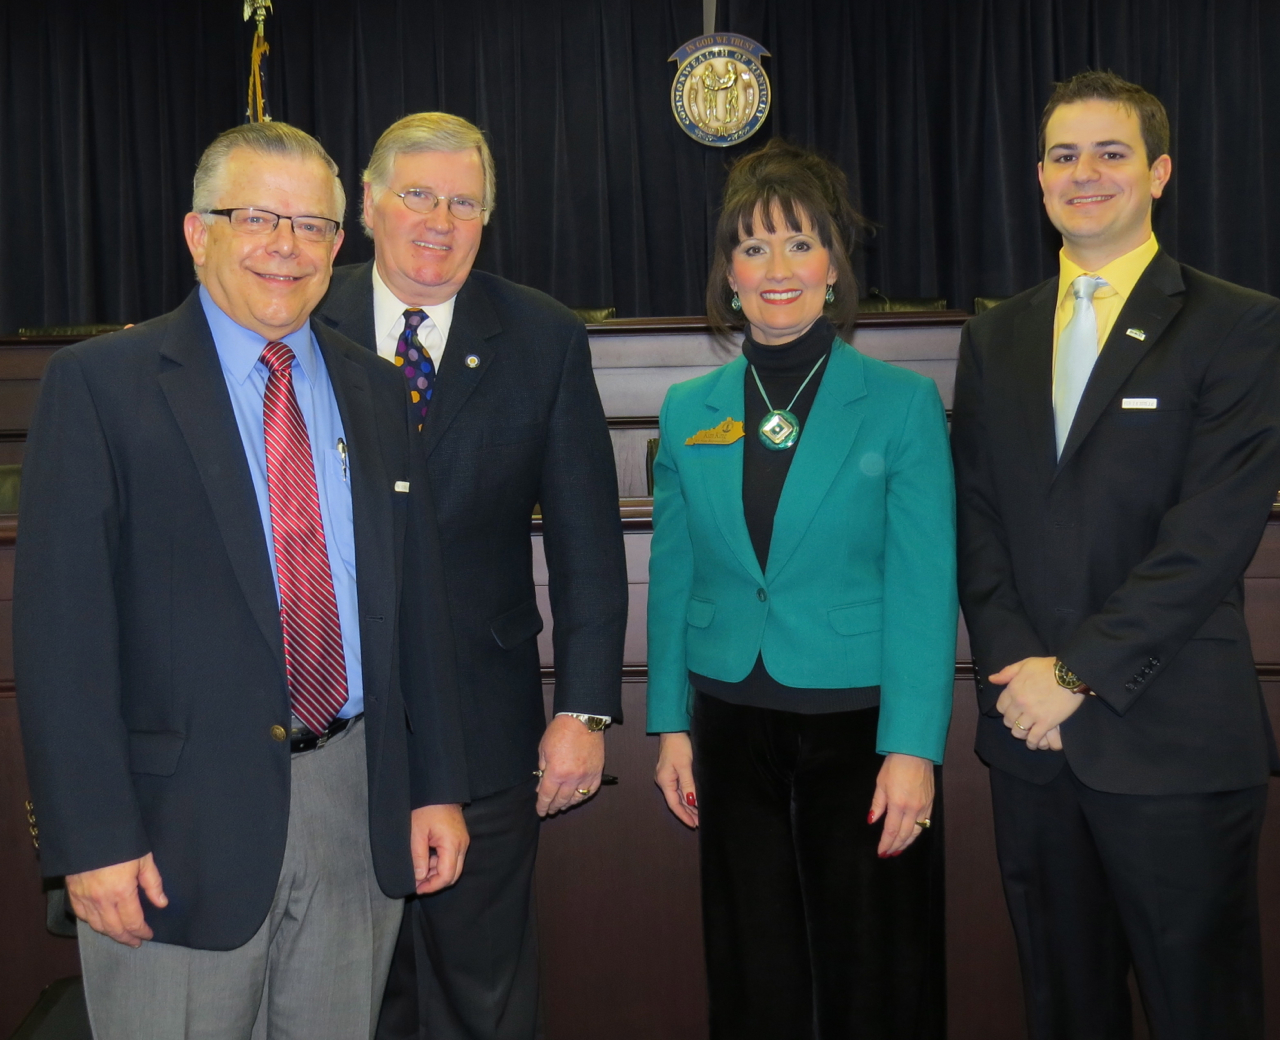 The Heartland Parkway Foundation Board of Directors welcomed visitors to Heartland Parkway Day at the capitol annex in Frankfort February 26. Board chairman Dr. John Chowning, left, was joined in this photo by Washington County representatives State Senator Tom Buford; State Representative Kim King; and Daniel Carney, executive director of Springfield-Washington County Economic Development. (Photo by Linda Marcum Waggener)